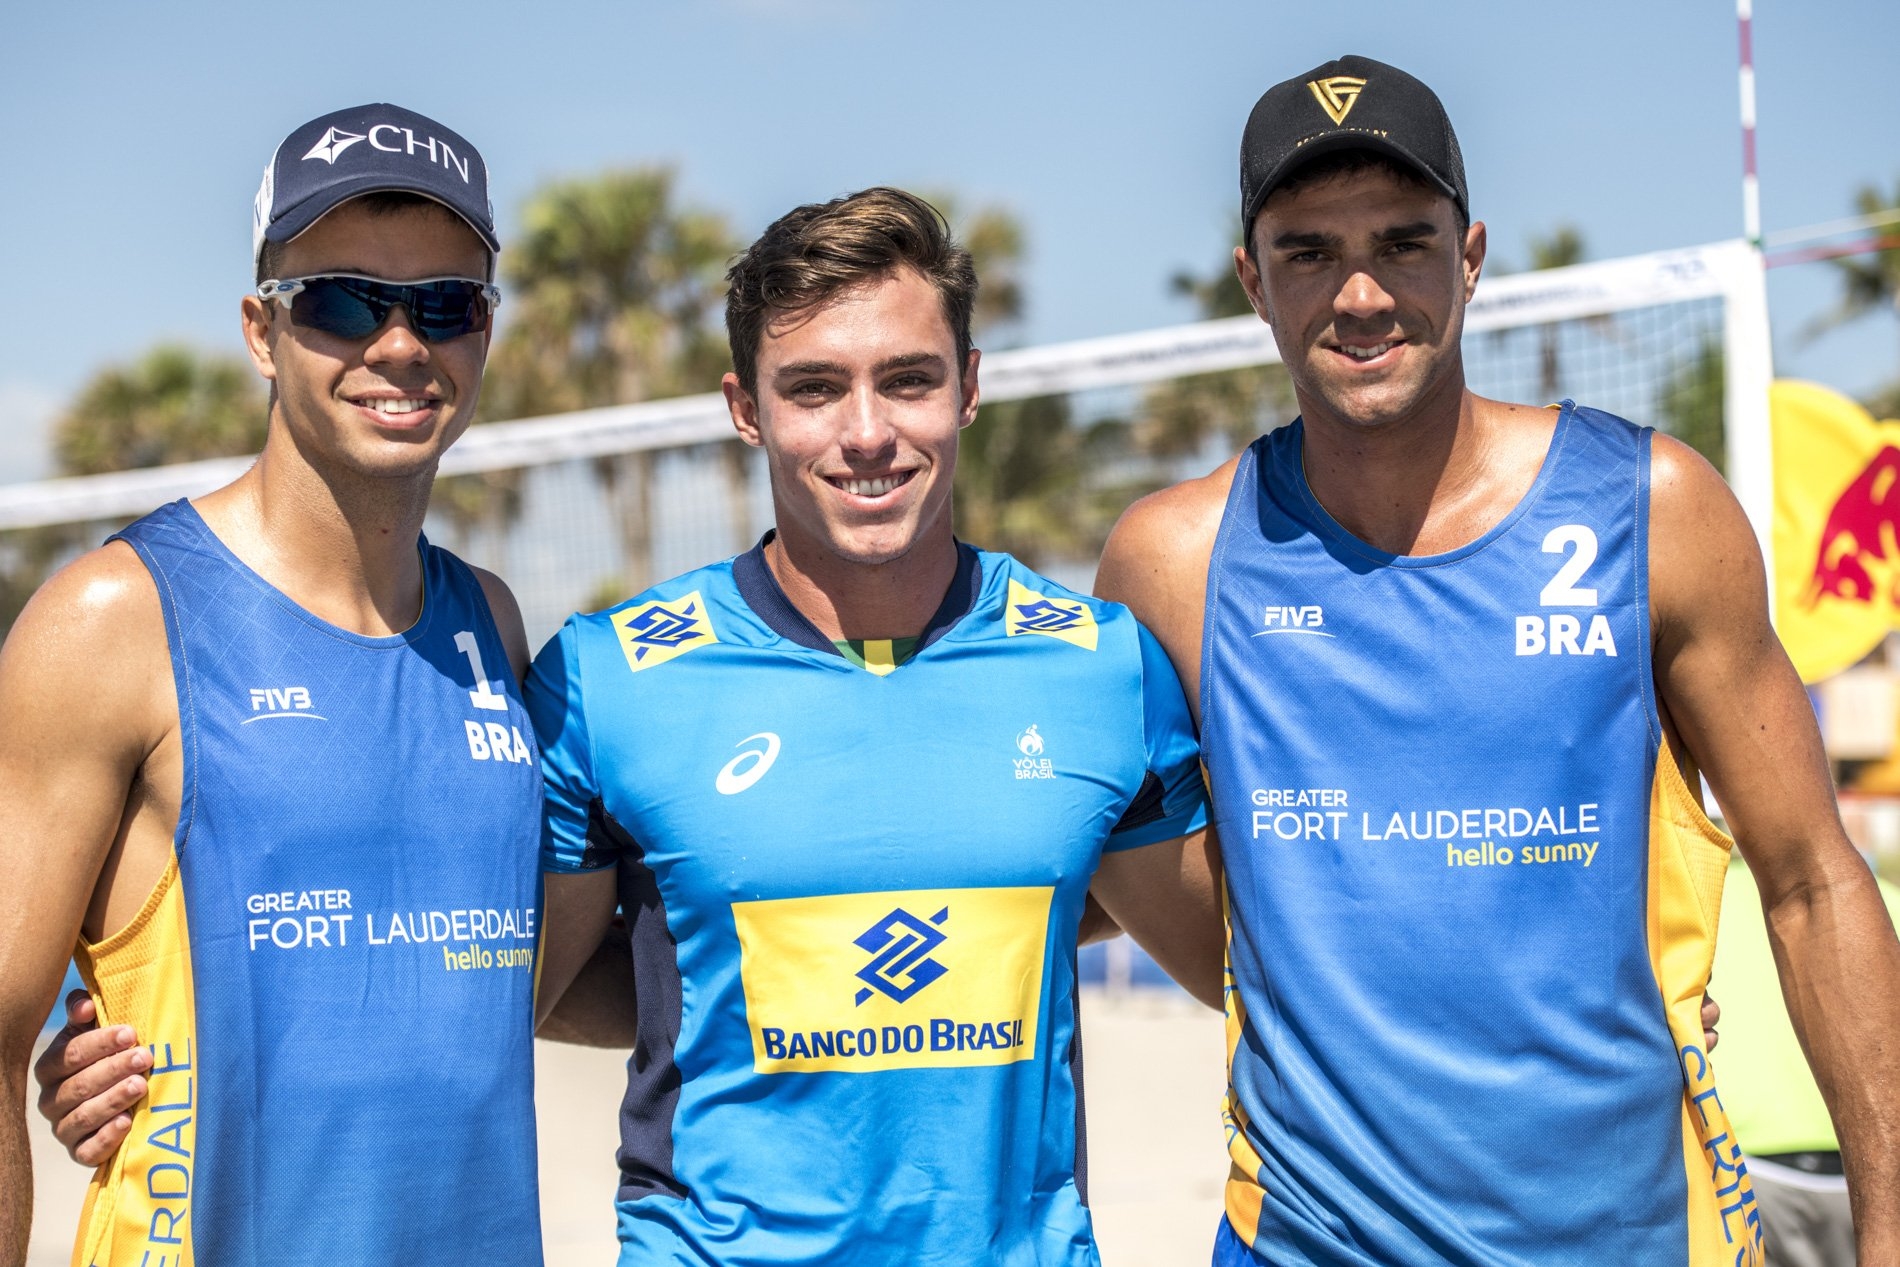 Iago with Guto (left) and Vitor (right) during the 2018 Fort Lauderdale Major